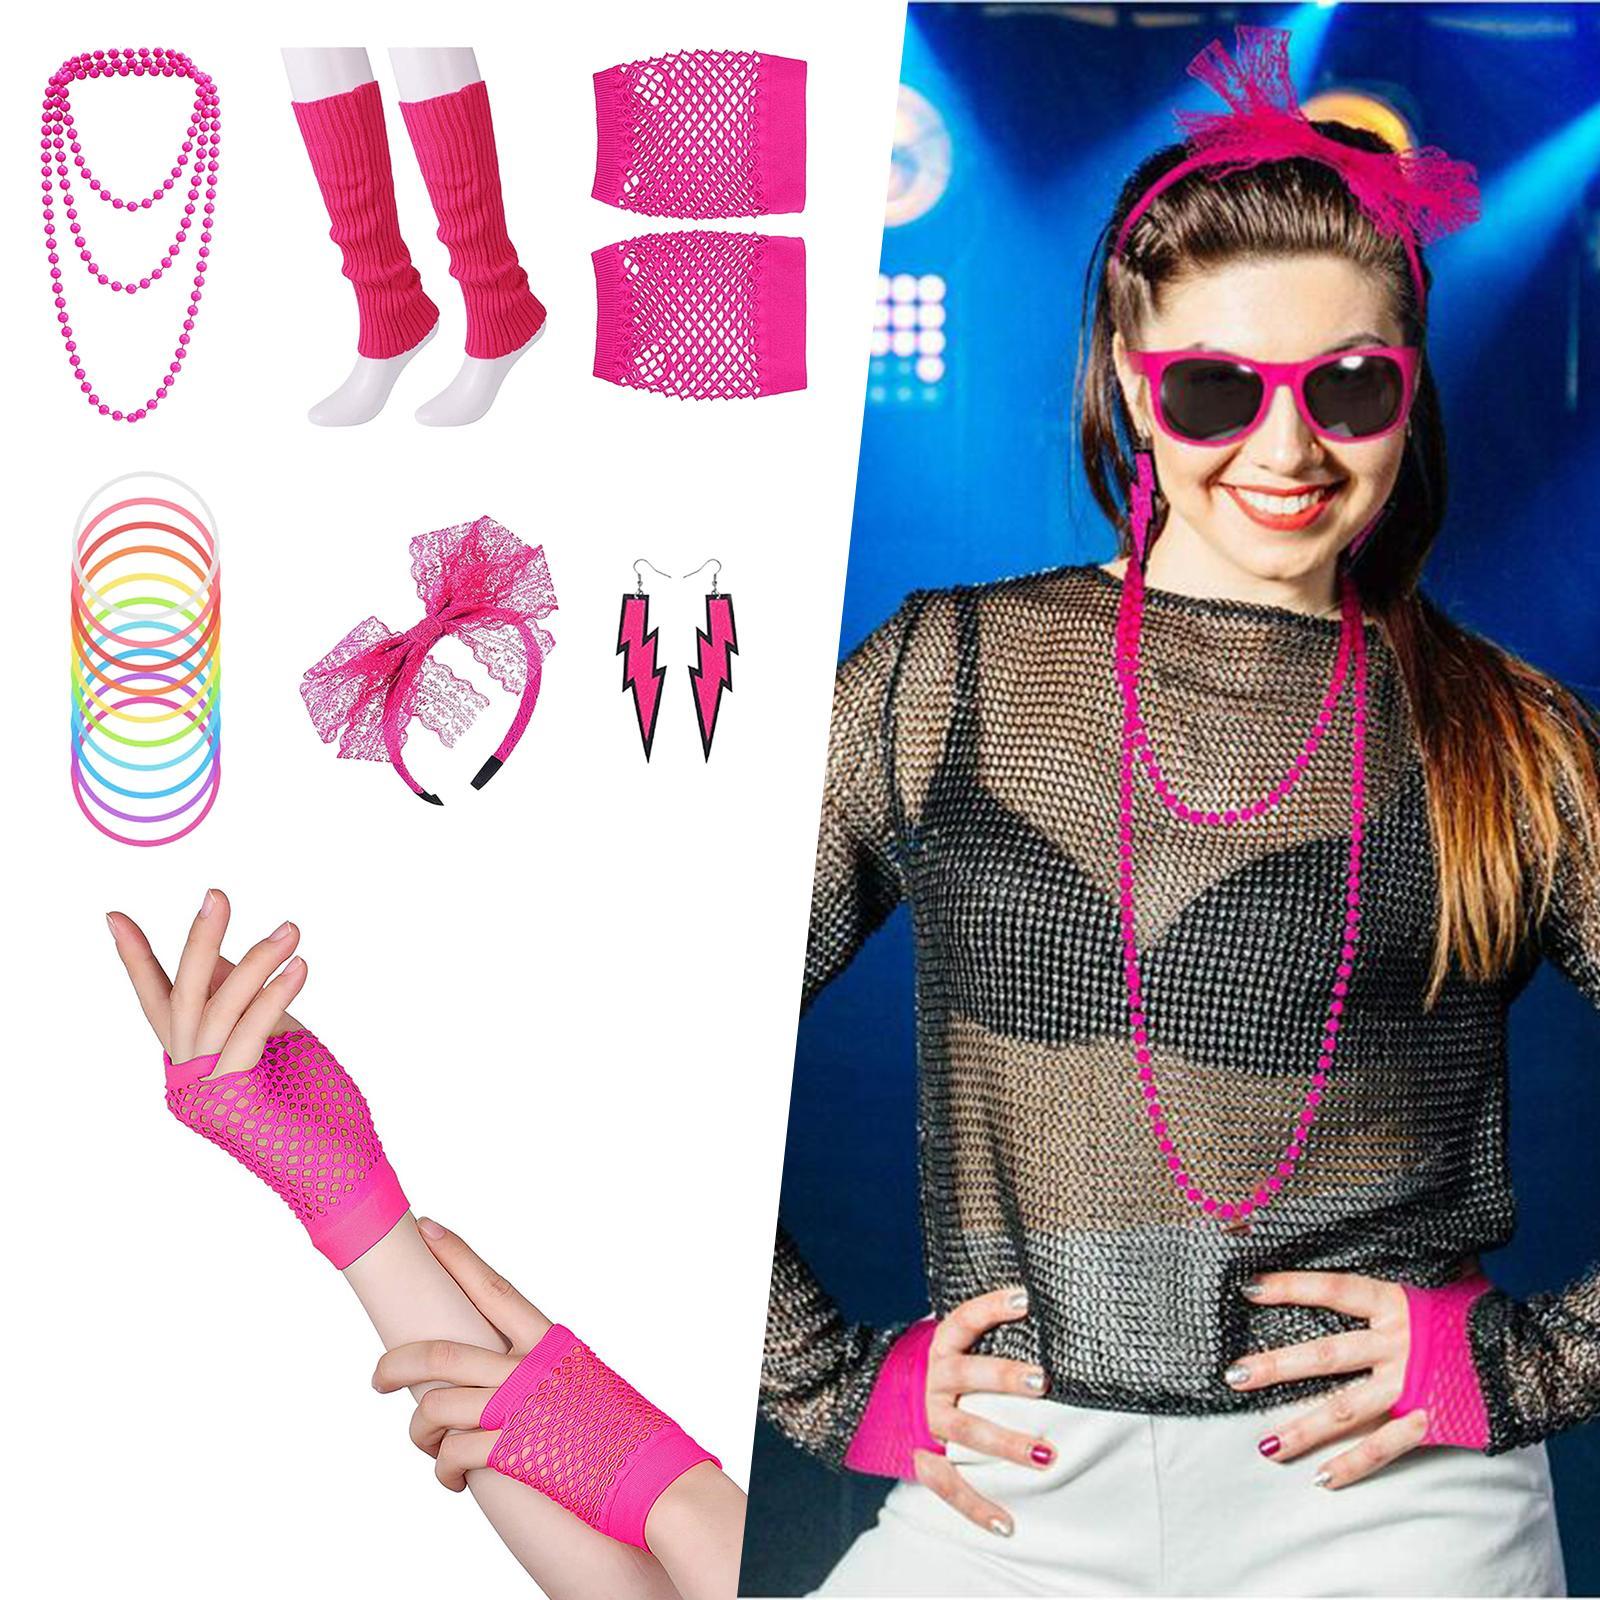 Costume Outfit Accessories Set Headband Beads Necklace Leg Warmers for Halloween